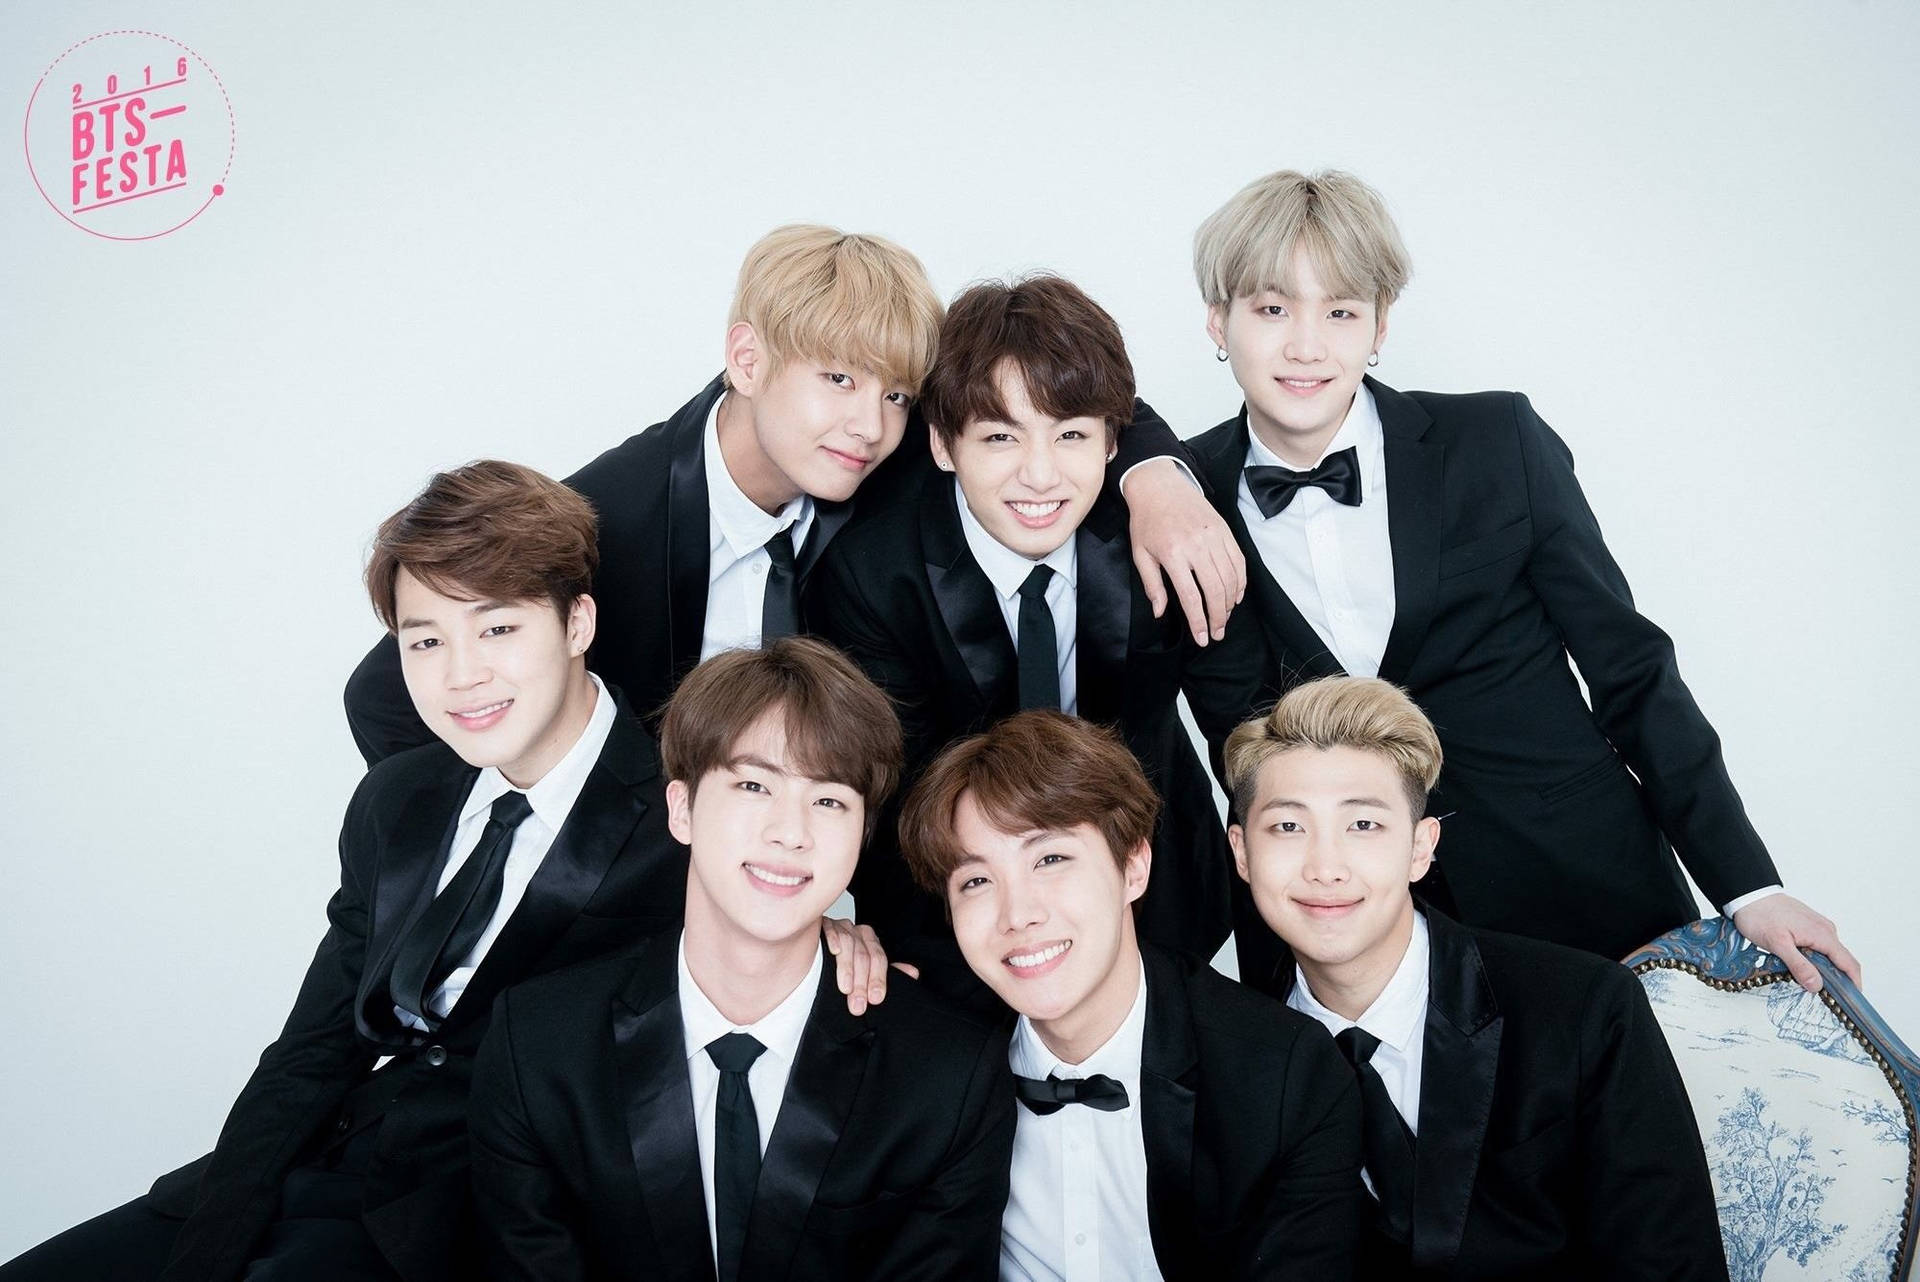 Free Bts Wallpaper Downloads, [1000+] Bts Wallpapers for FREE |  